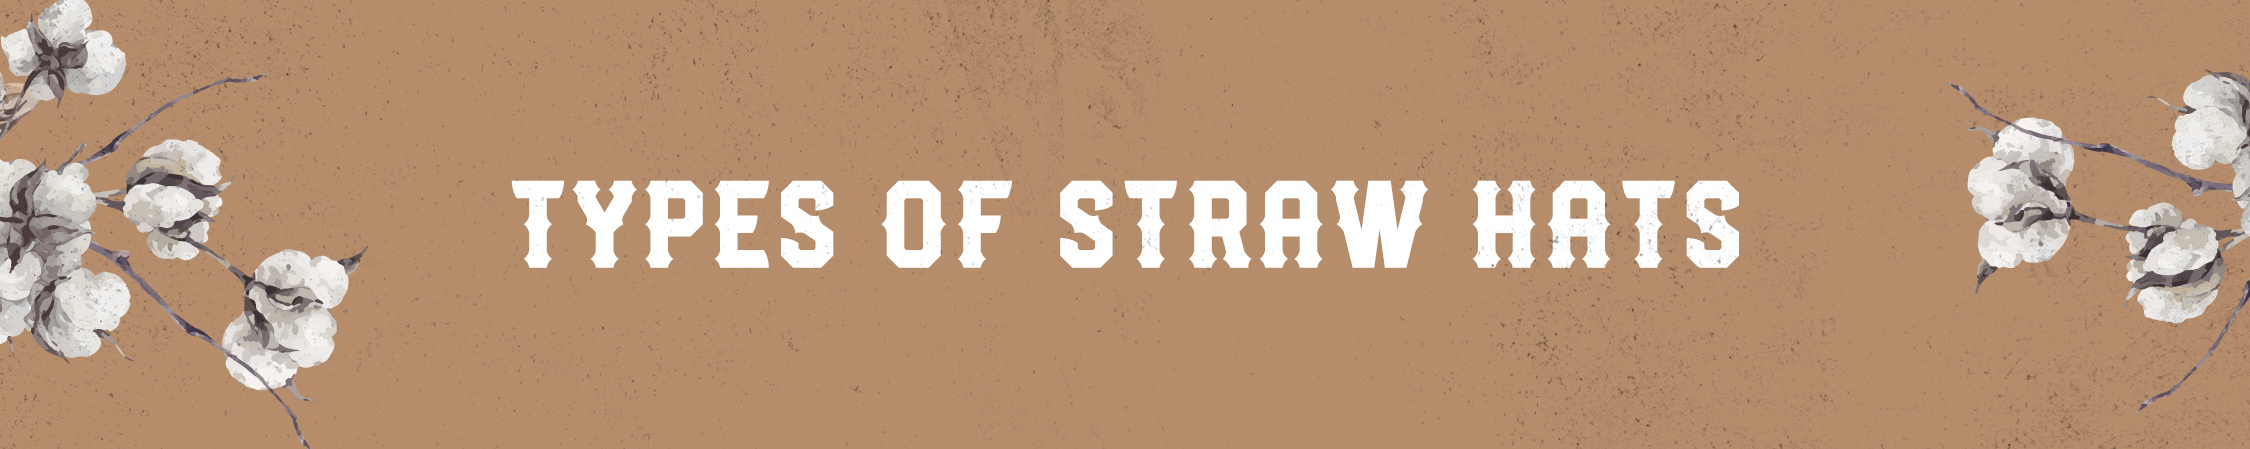 Types of Straw Hats